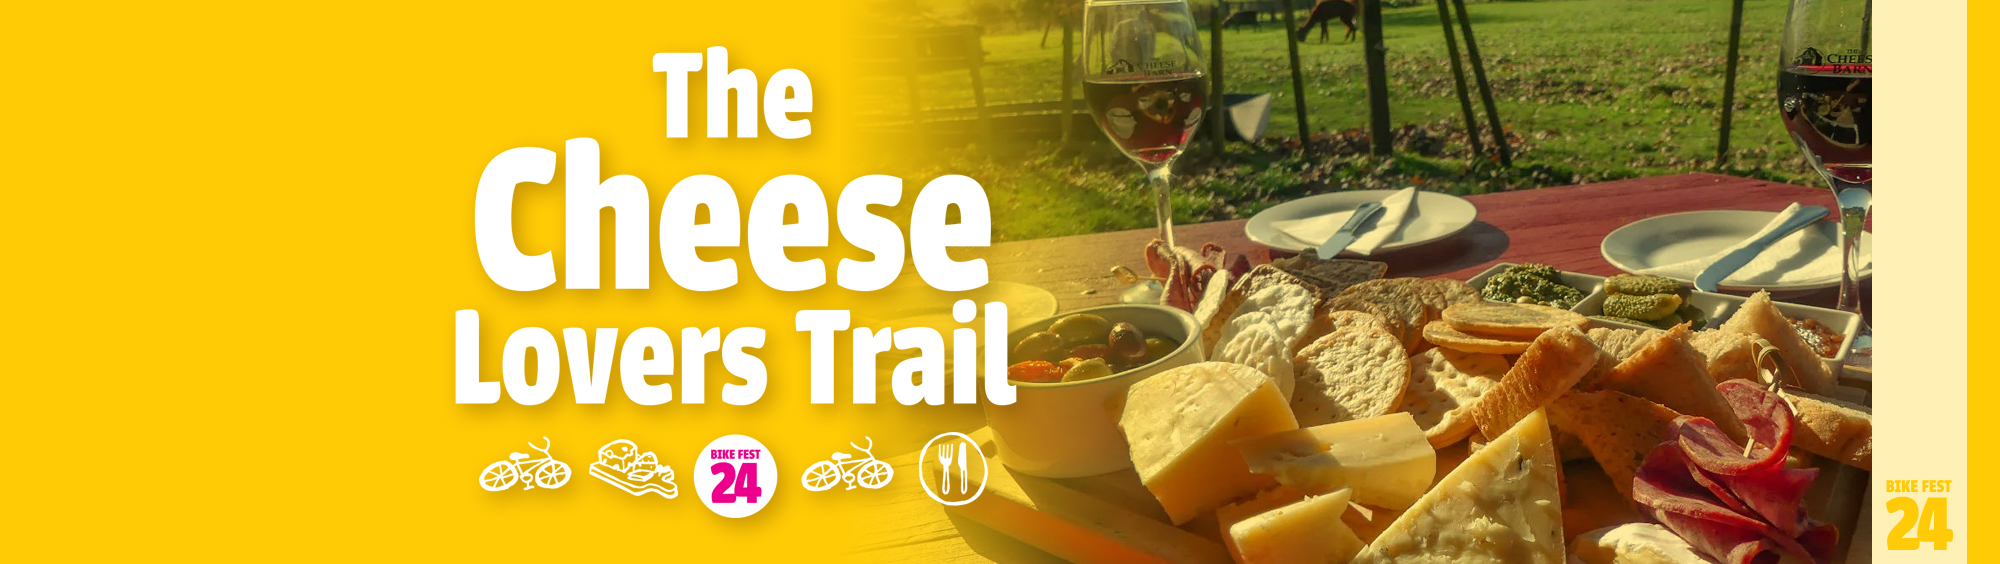 The Cheese Lovers Trail 